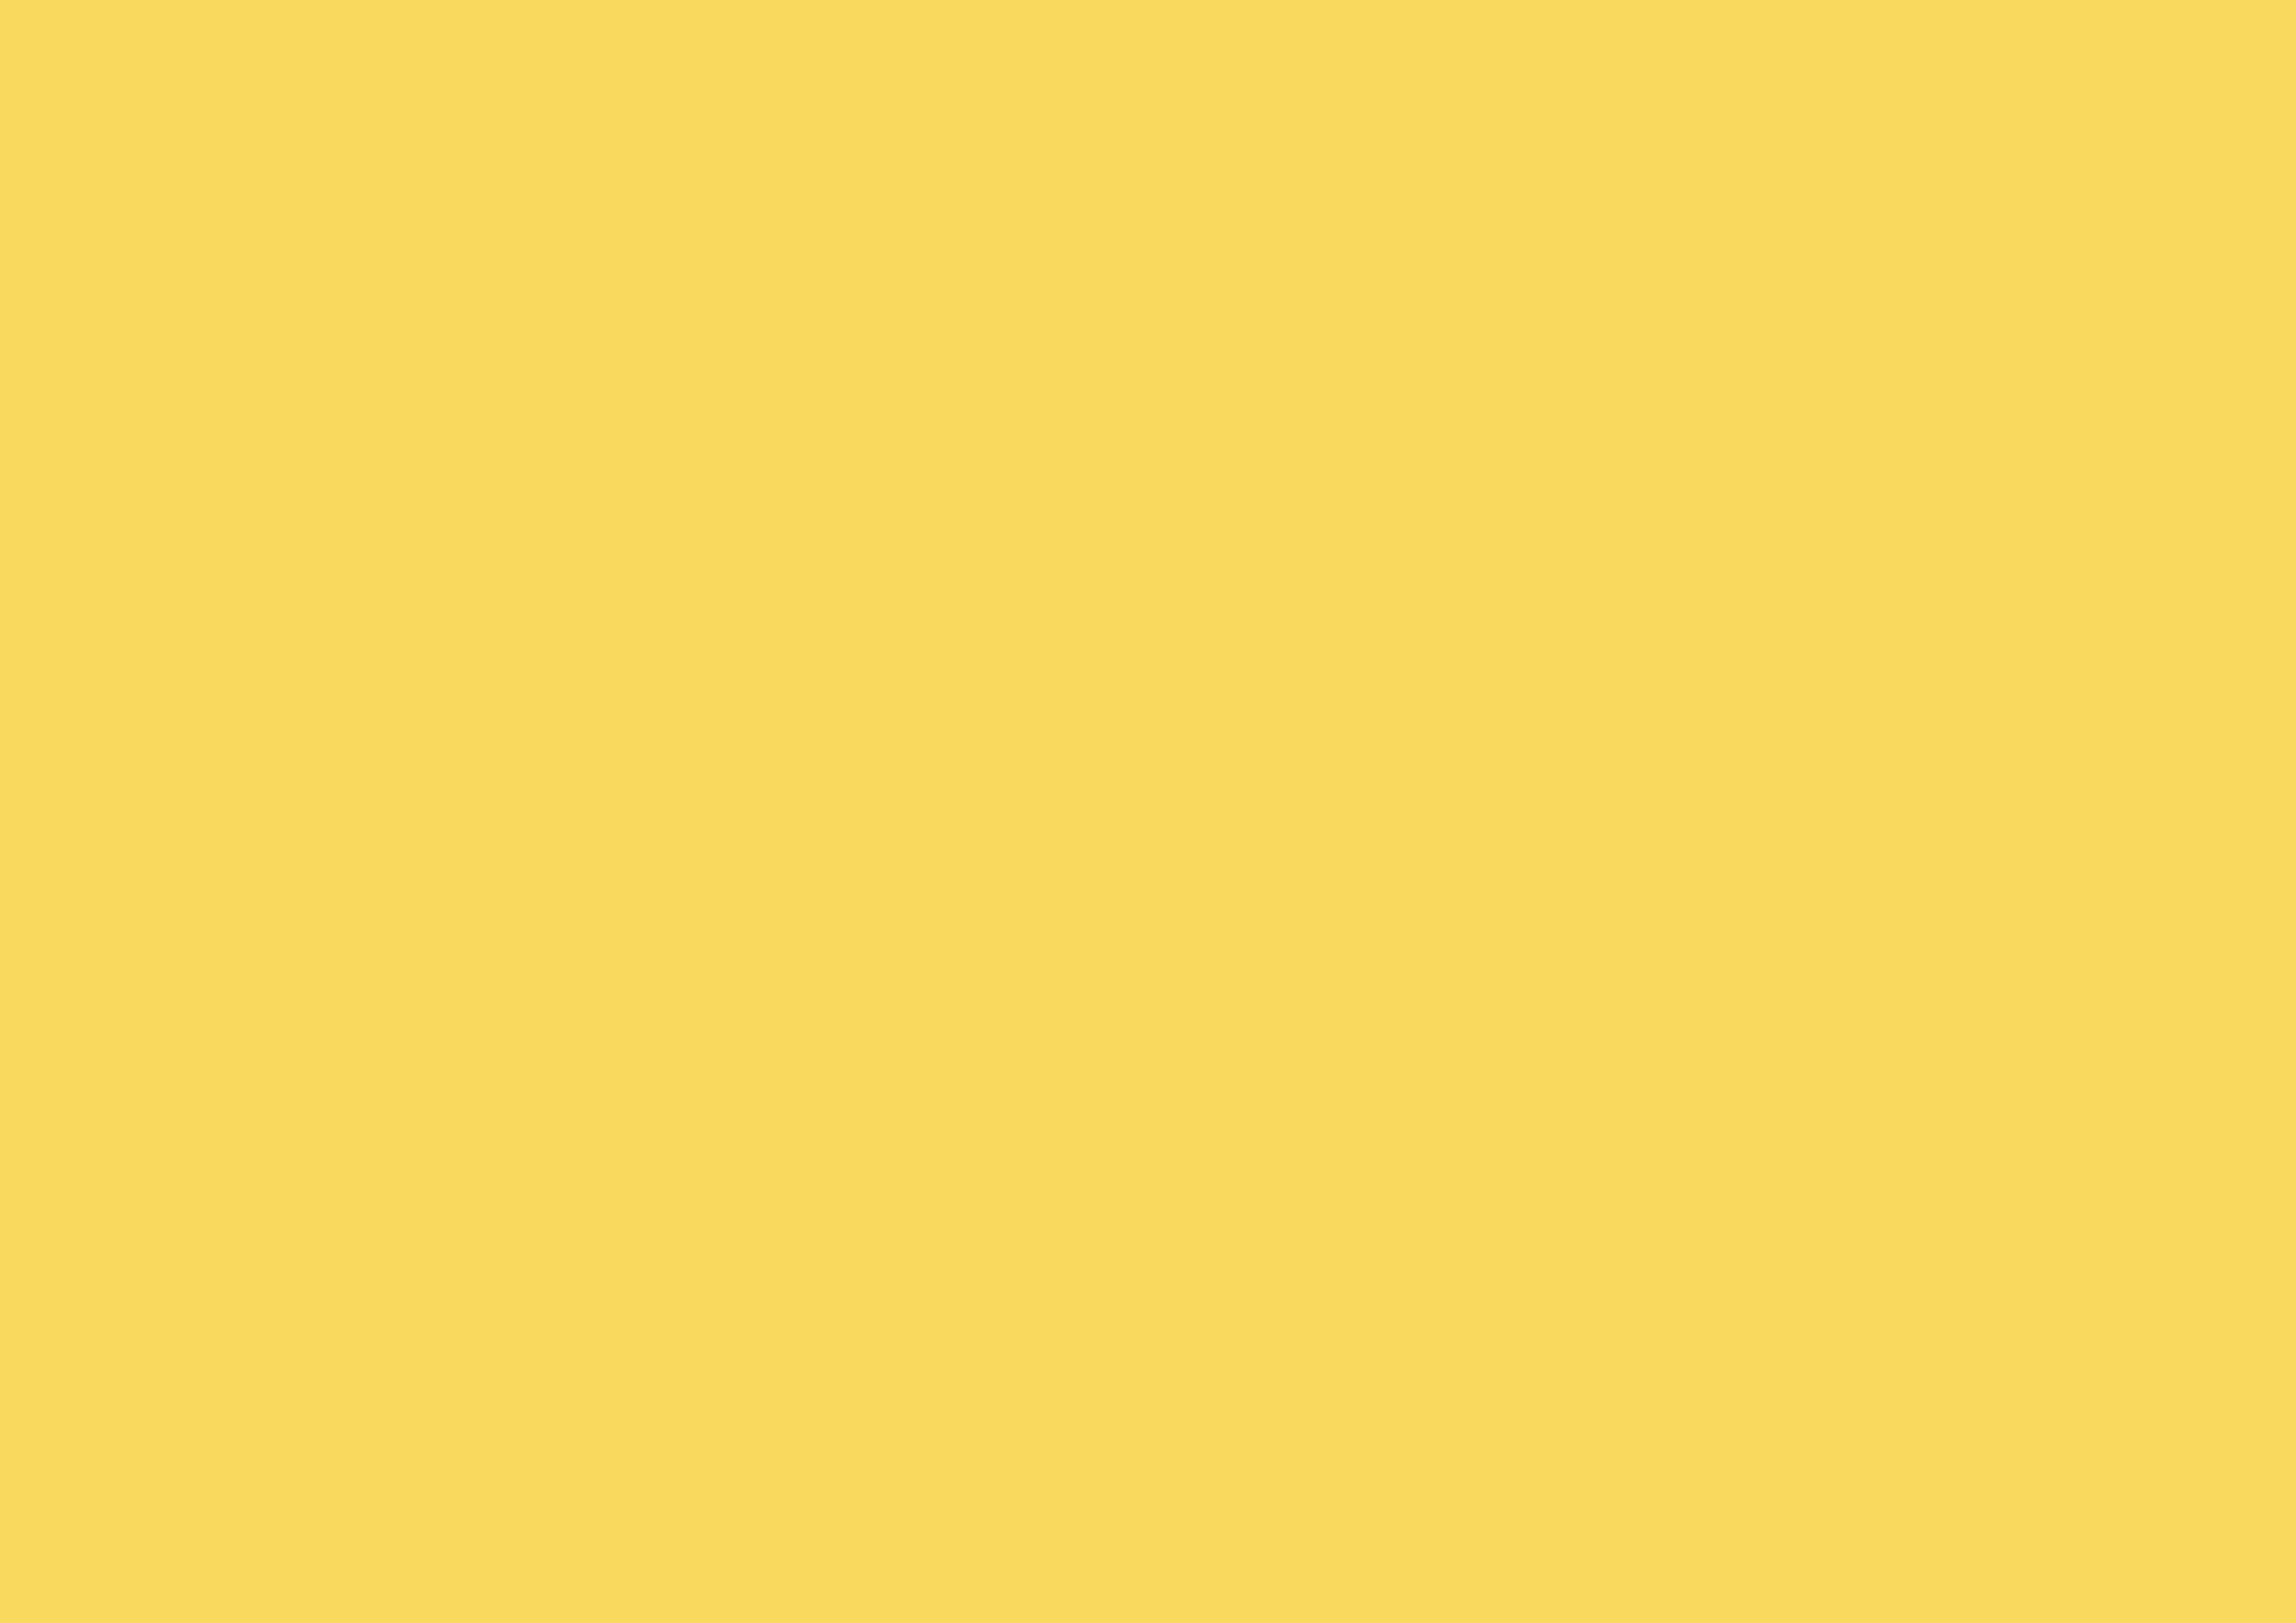 3508x2480 Royal Yellow Solid Color Background